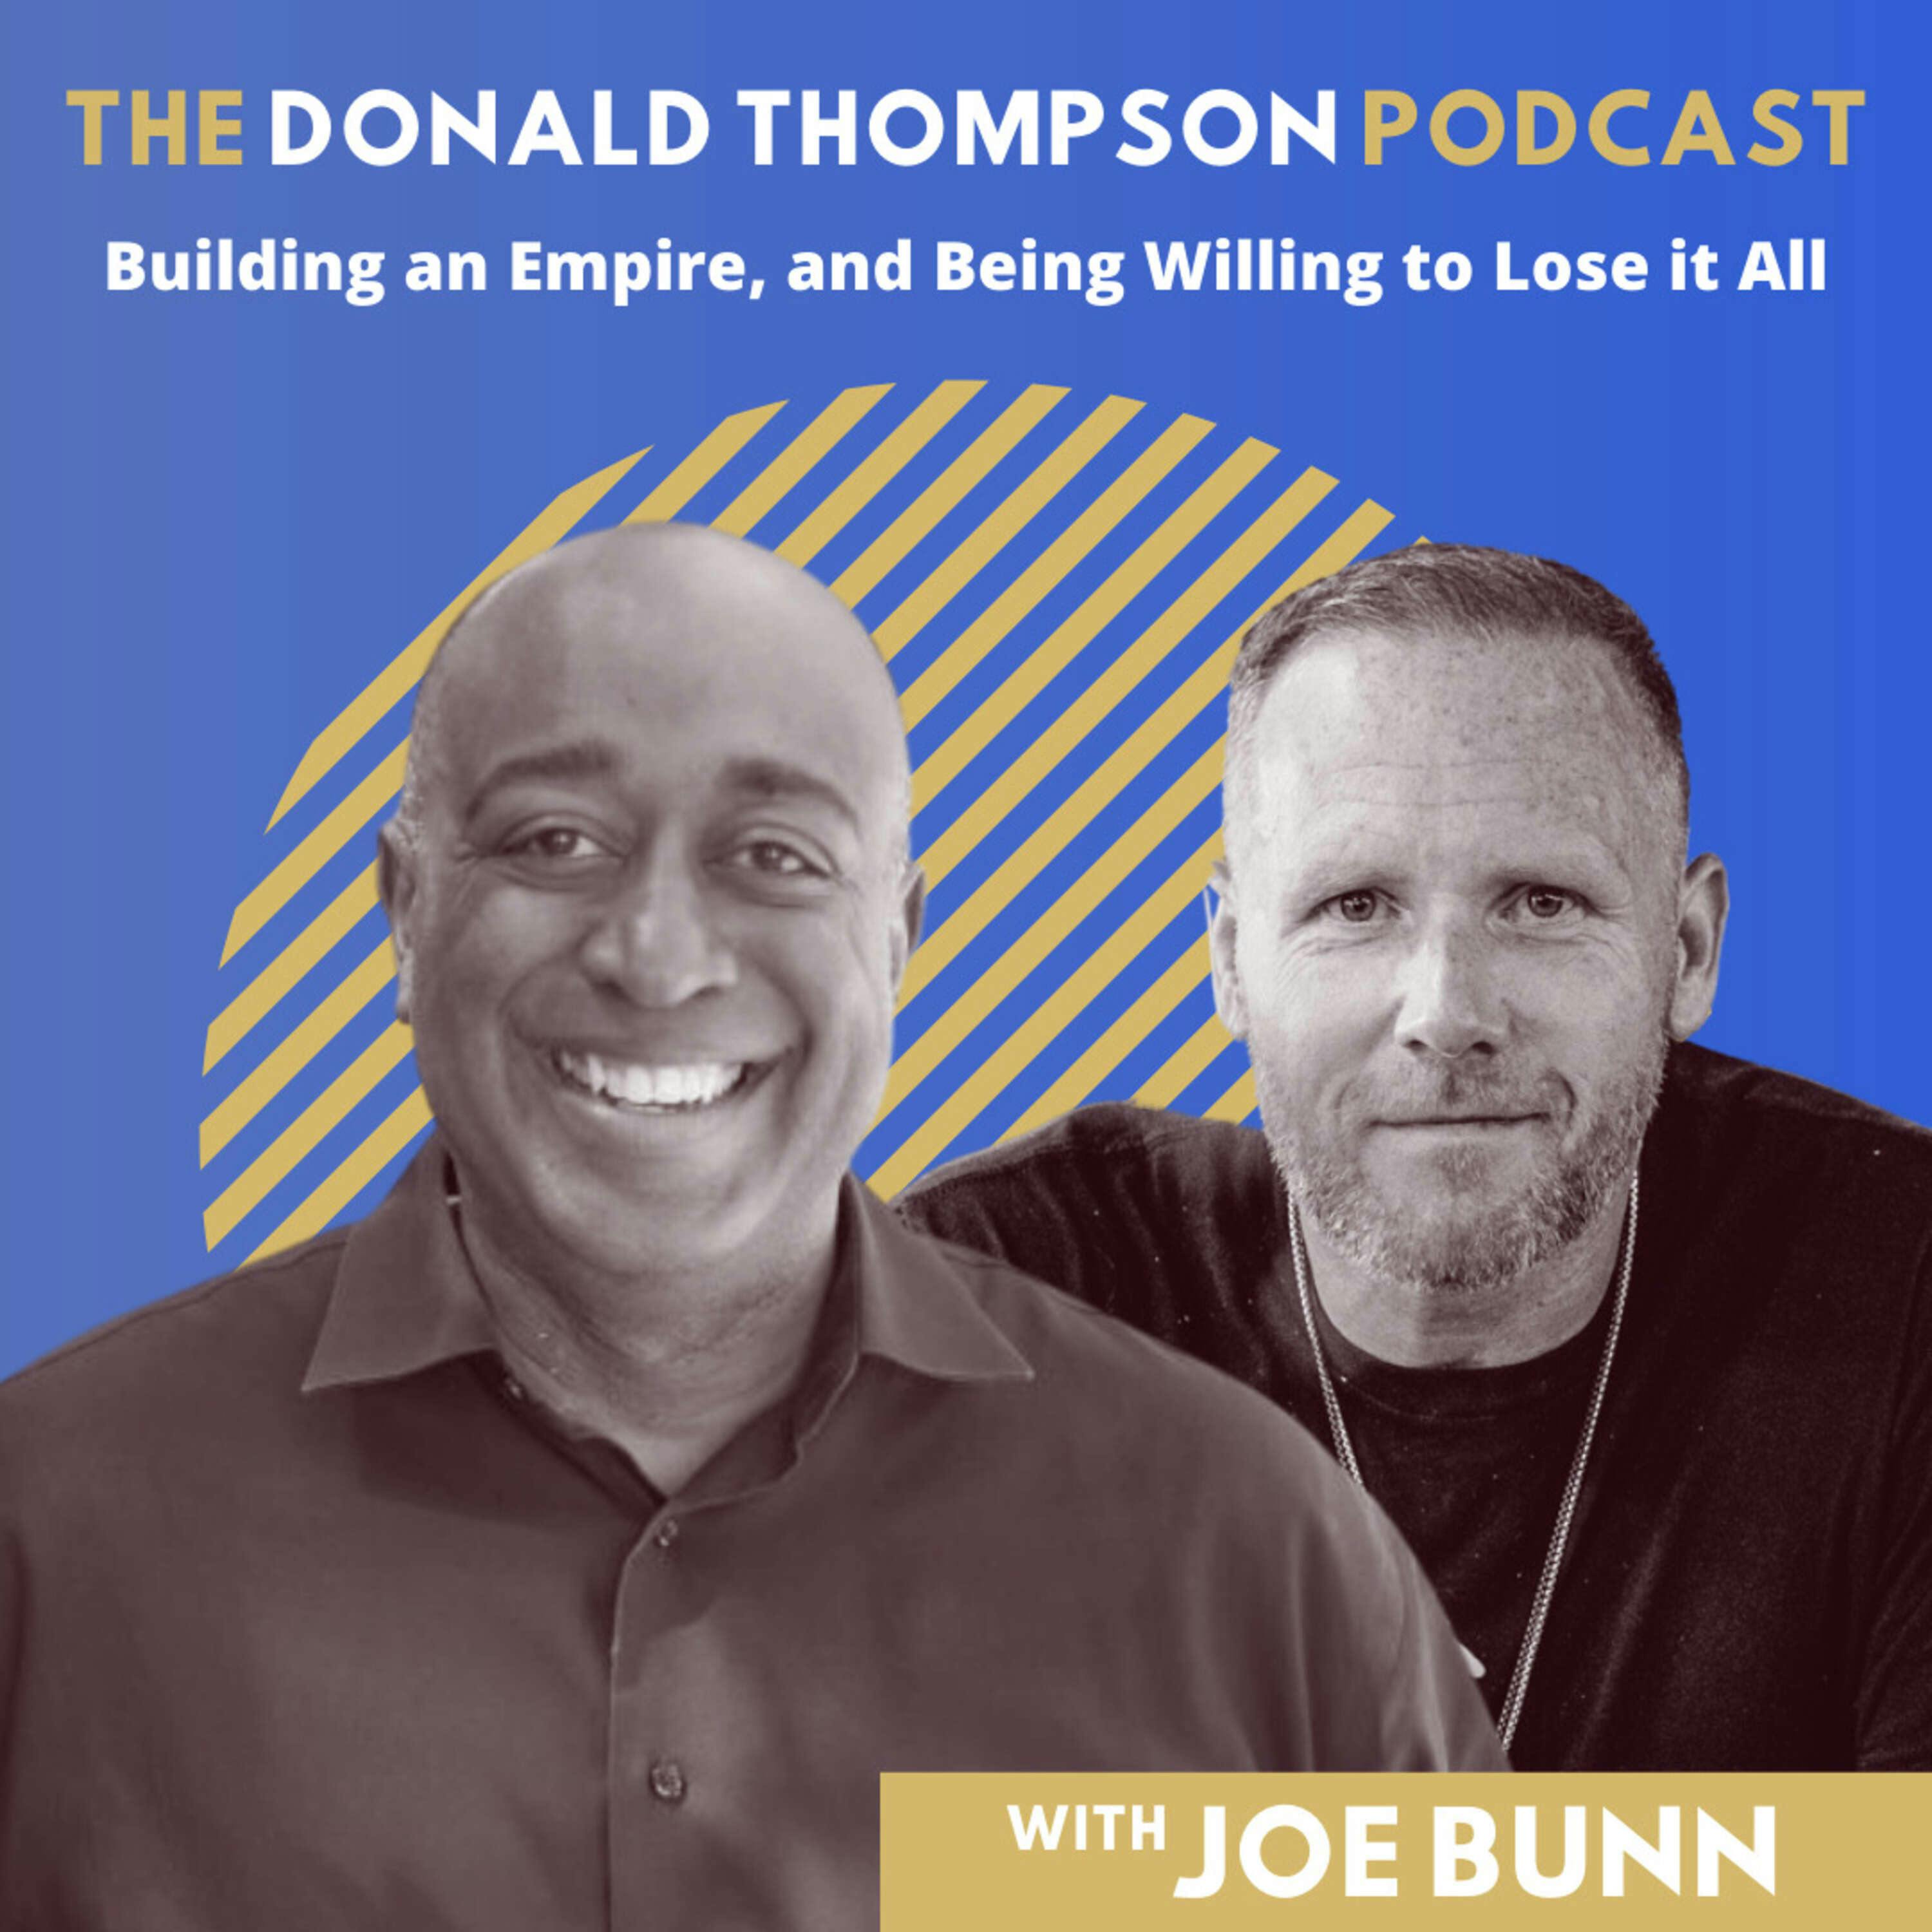 Joe Bunn on Building an Empire, and Being Willing to Lose It All